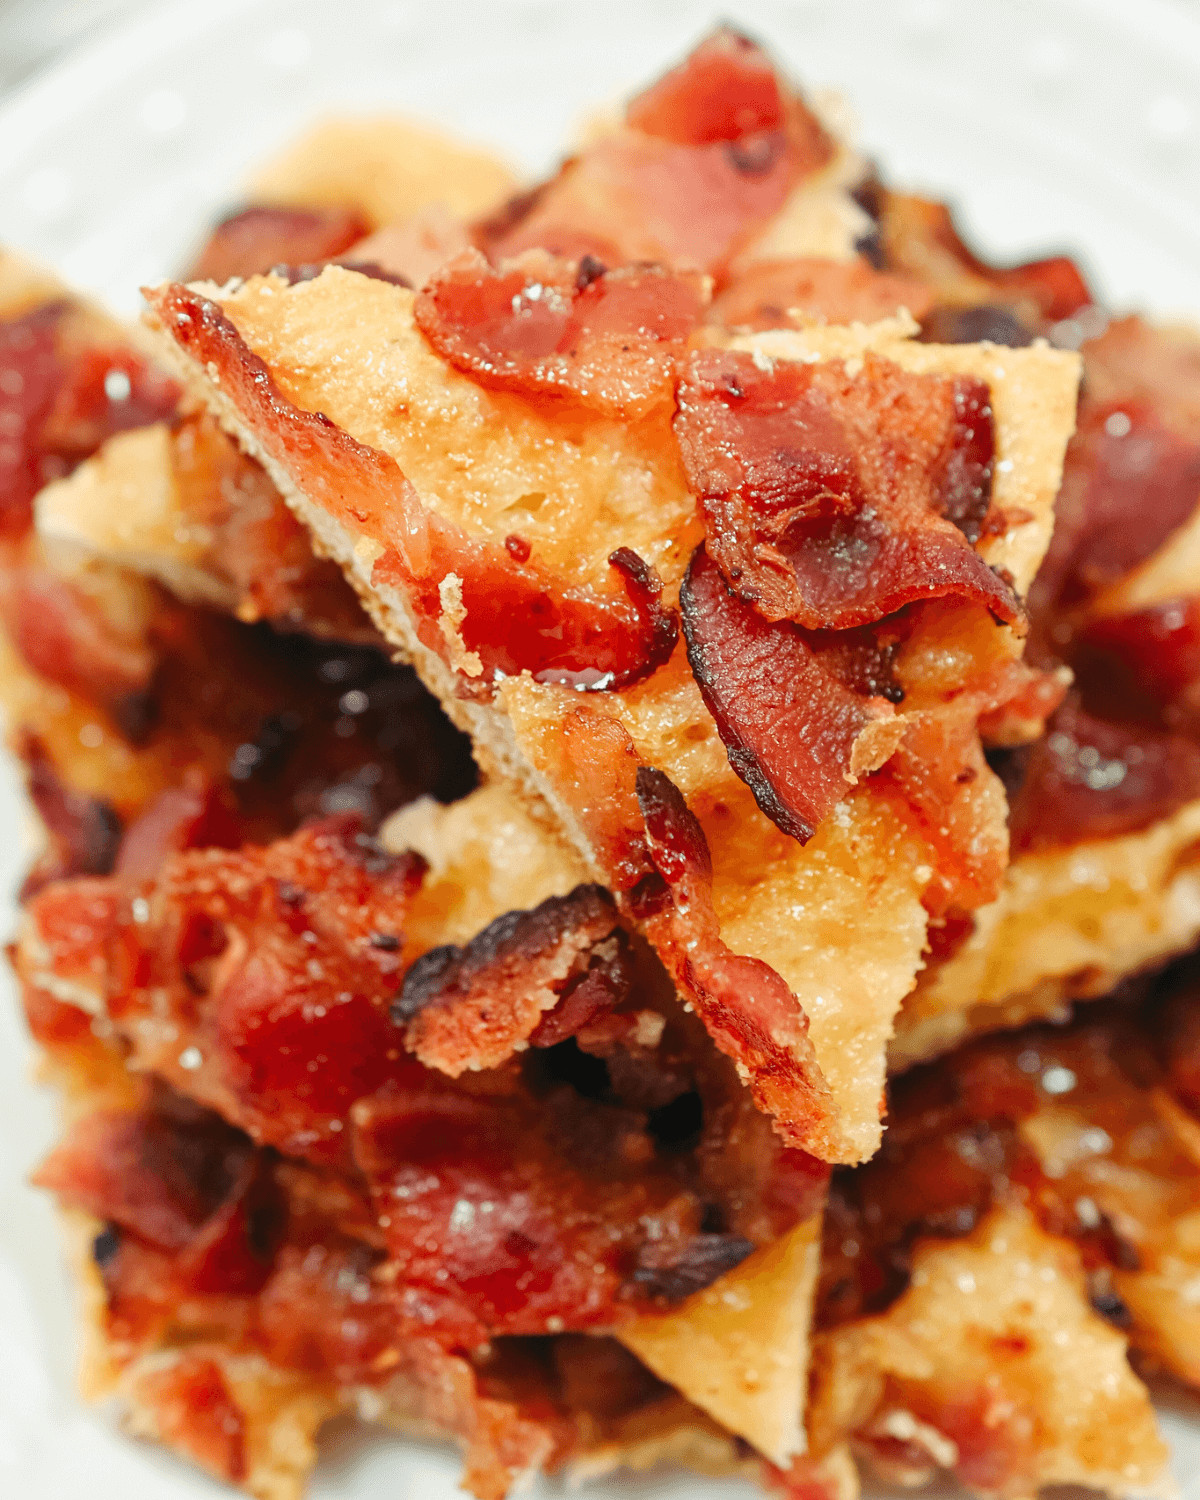 A plate with maple bacon crack on it.